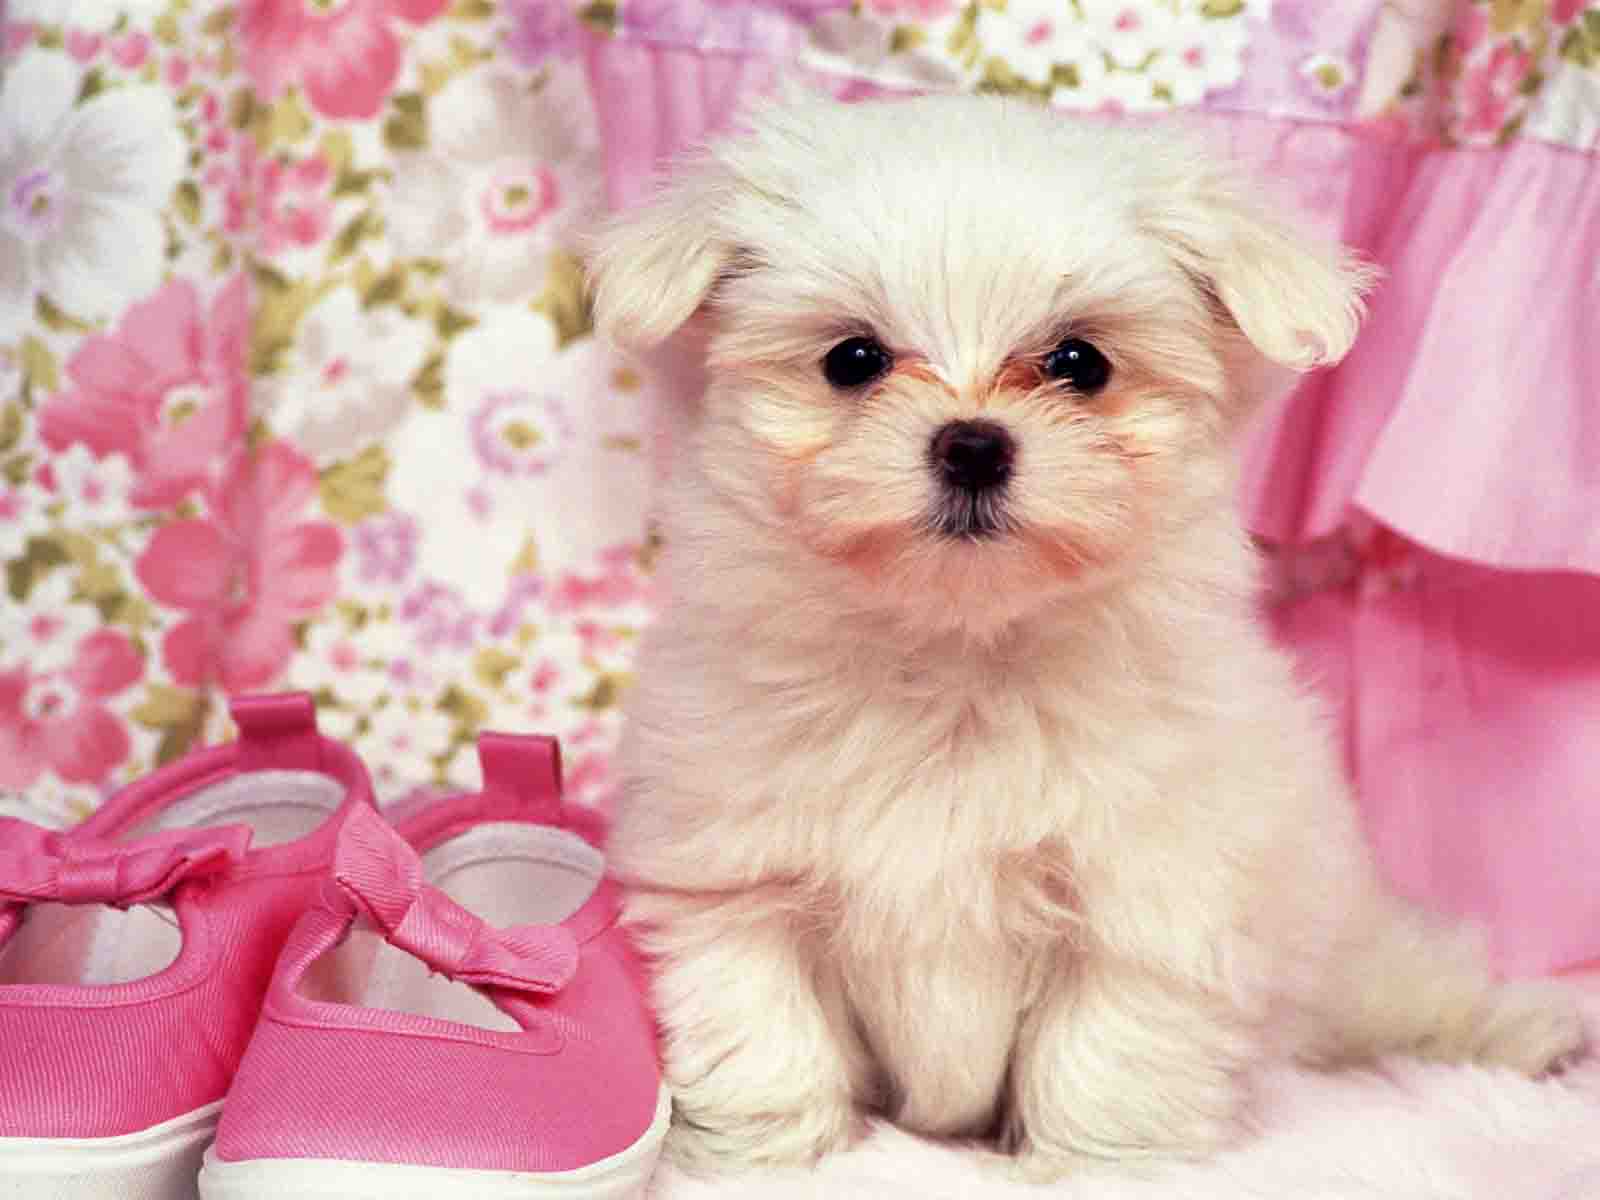 actress movie popular: CUTE PUPPY HD WALLPAPERS